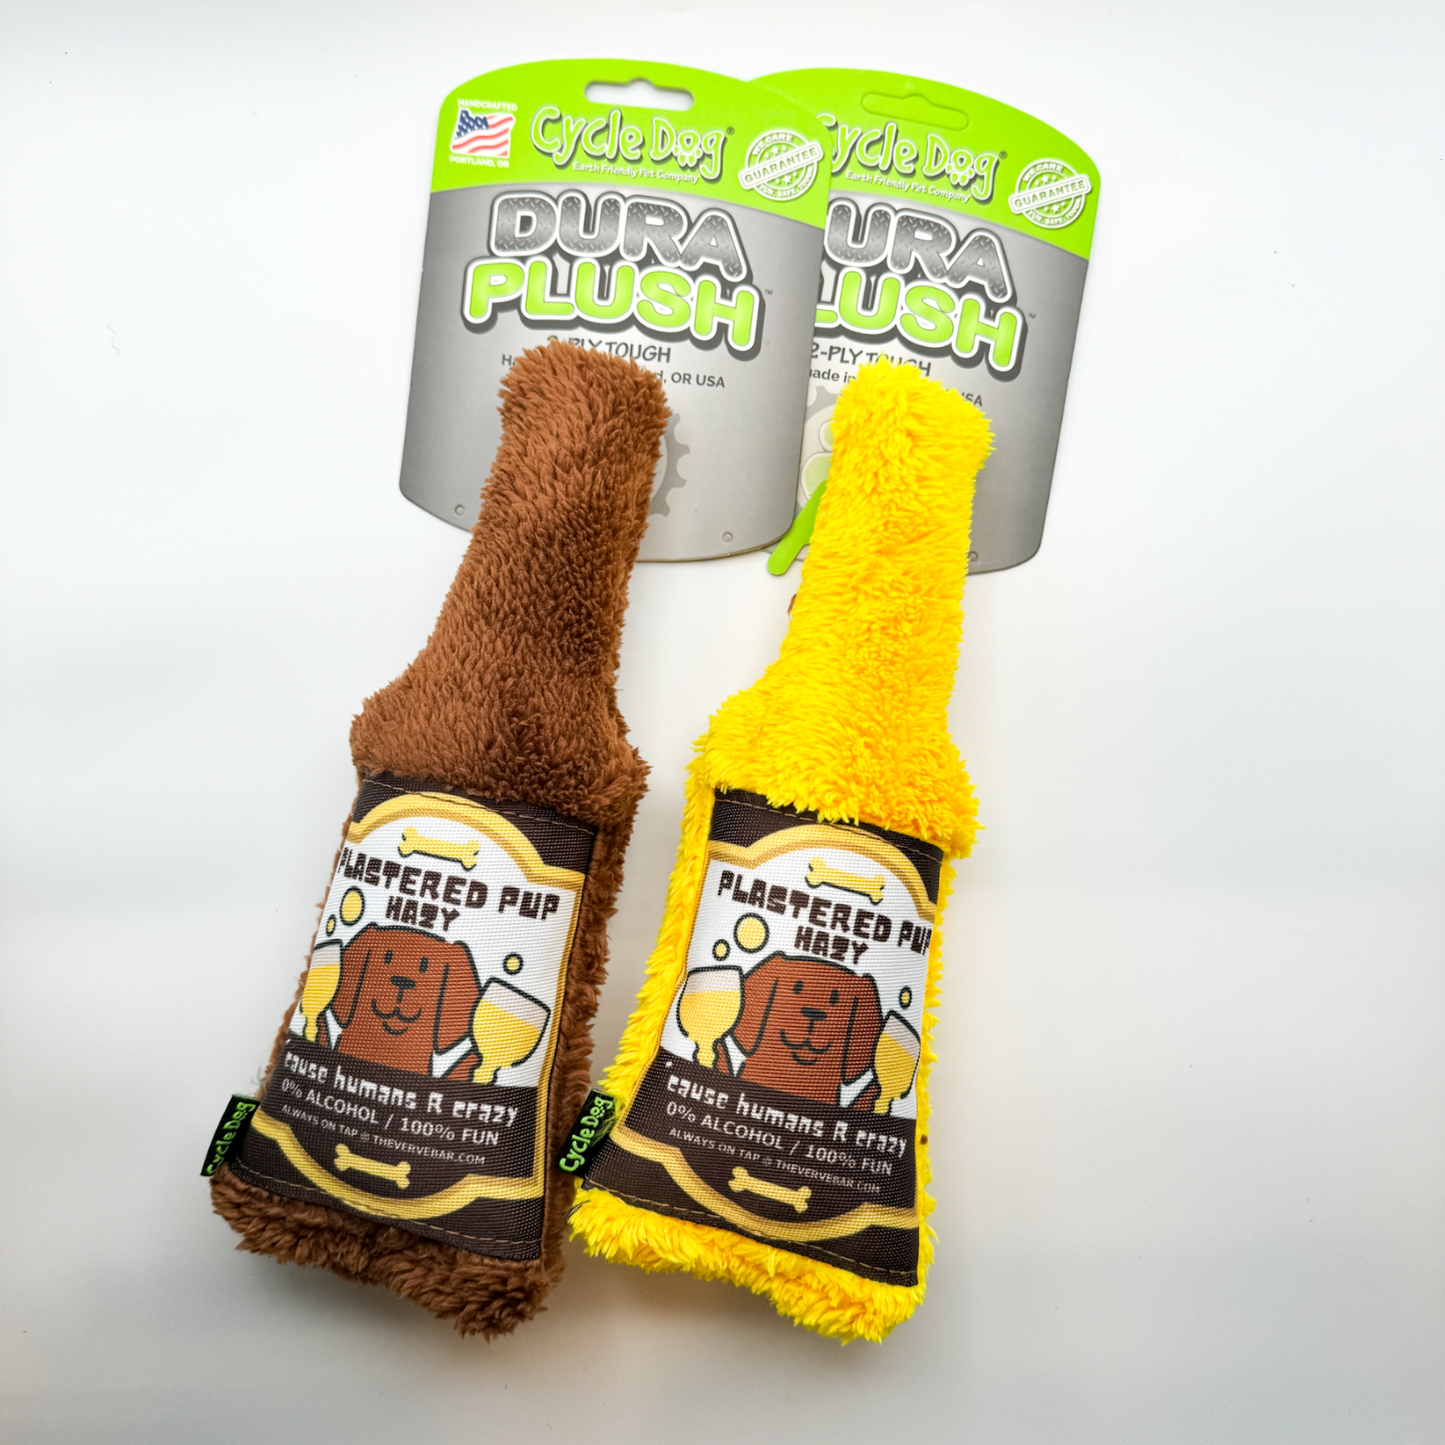 Two color options for dog beer bottle toy: brown or yellow